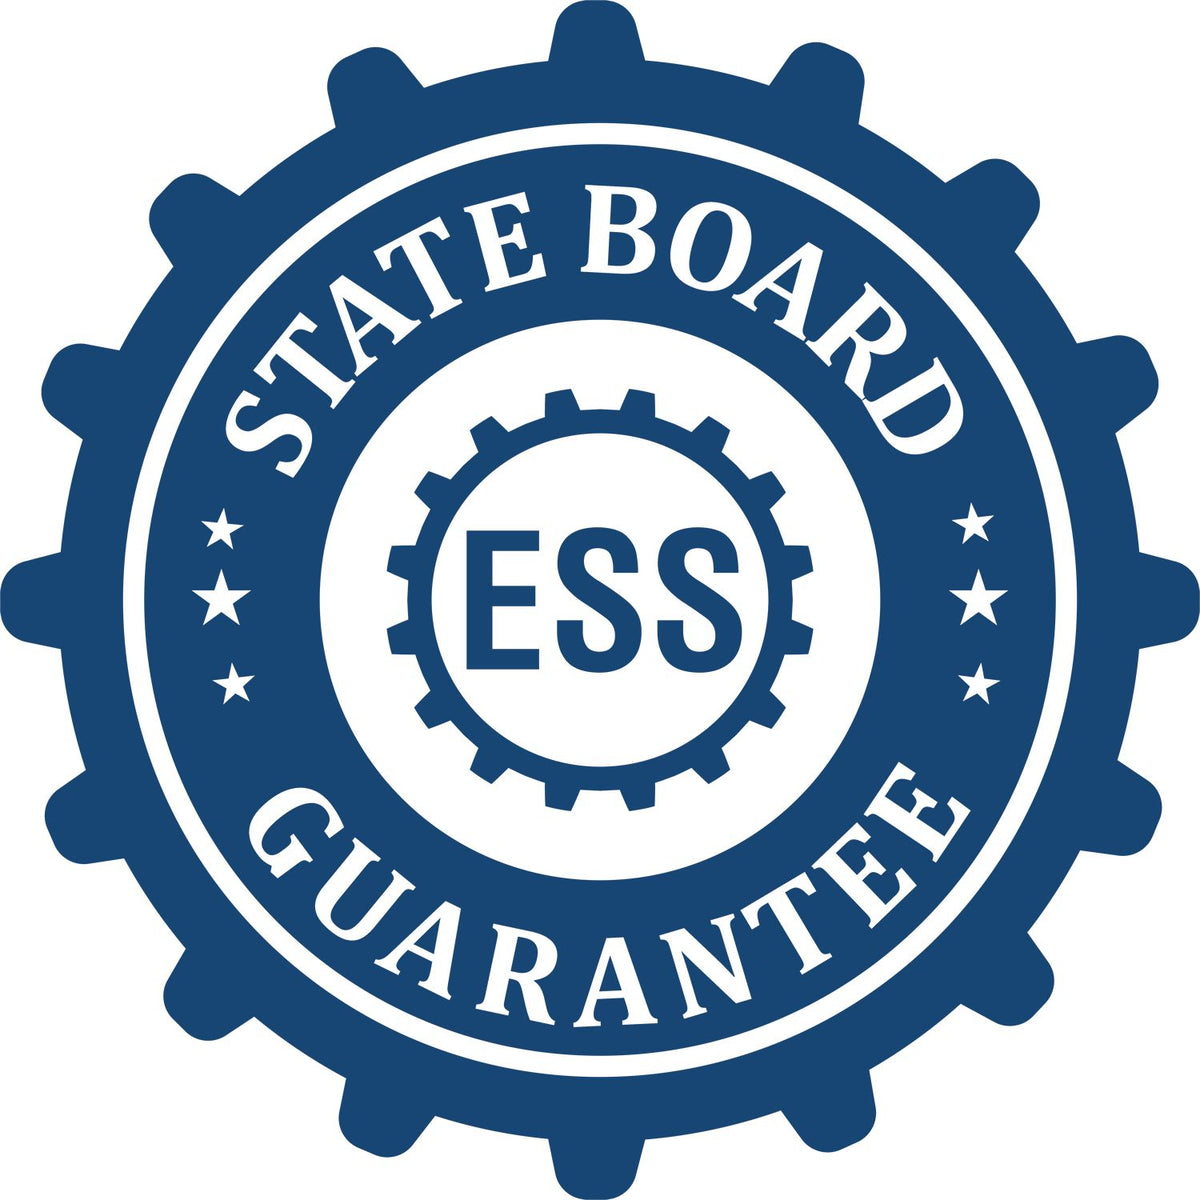 An emblem in a gear shape illustrating a state board guarantee for the Hybrid Tennessee Geologist Seal